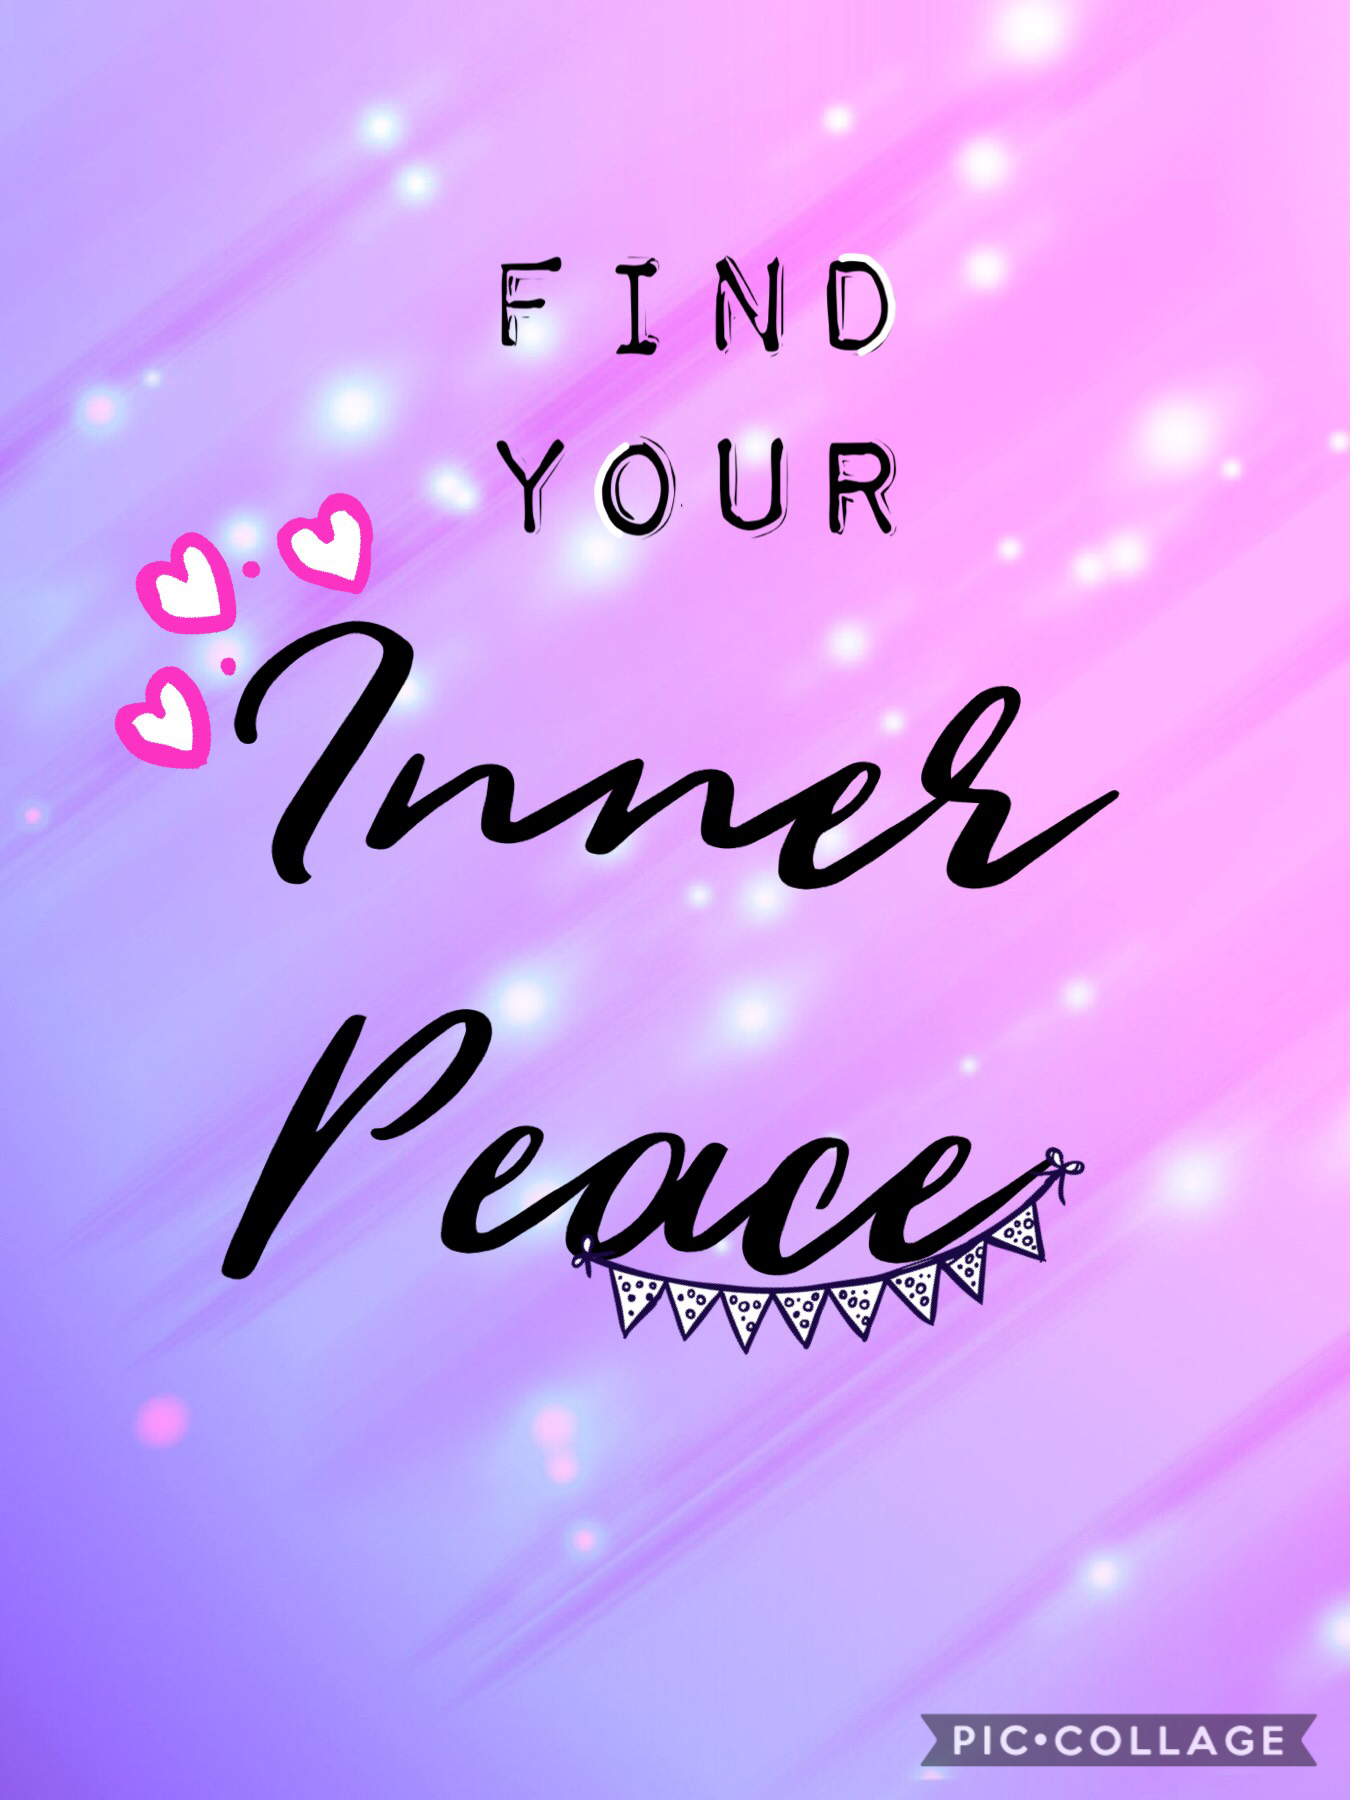 Tap 😘
Always remember to find your Inner Peace in those difficult times!